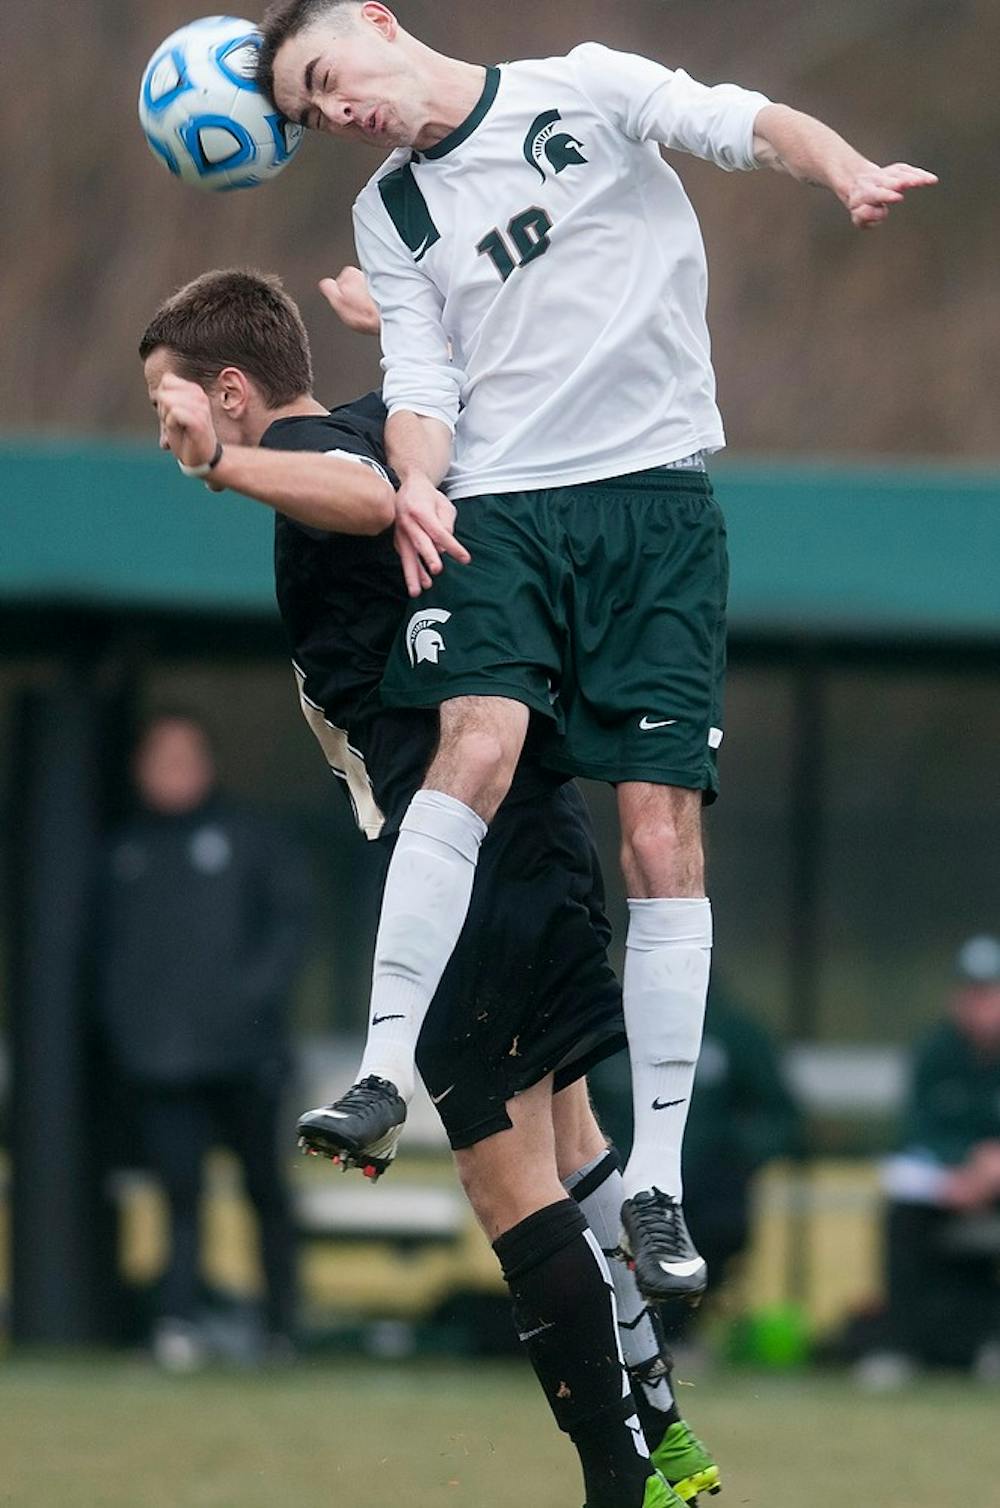 <p>Junior midfielder Jay Chapman heads the ball as Oakland midfielder Derek Nowak defends Nov. 23, 2014, during the game against Oakland at DeMartin Stadium at Old College Field. The Spartans defeated the Golden Grizzlies, 1-0. Aerika Williams/The State News </p>